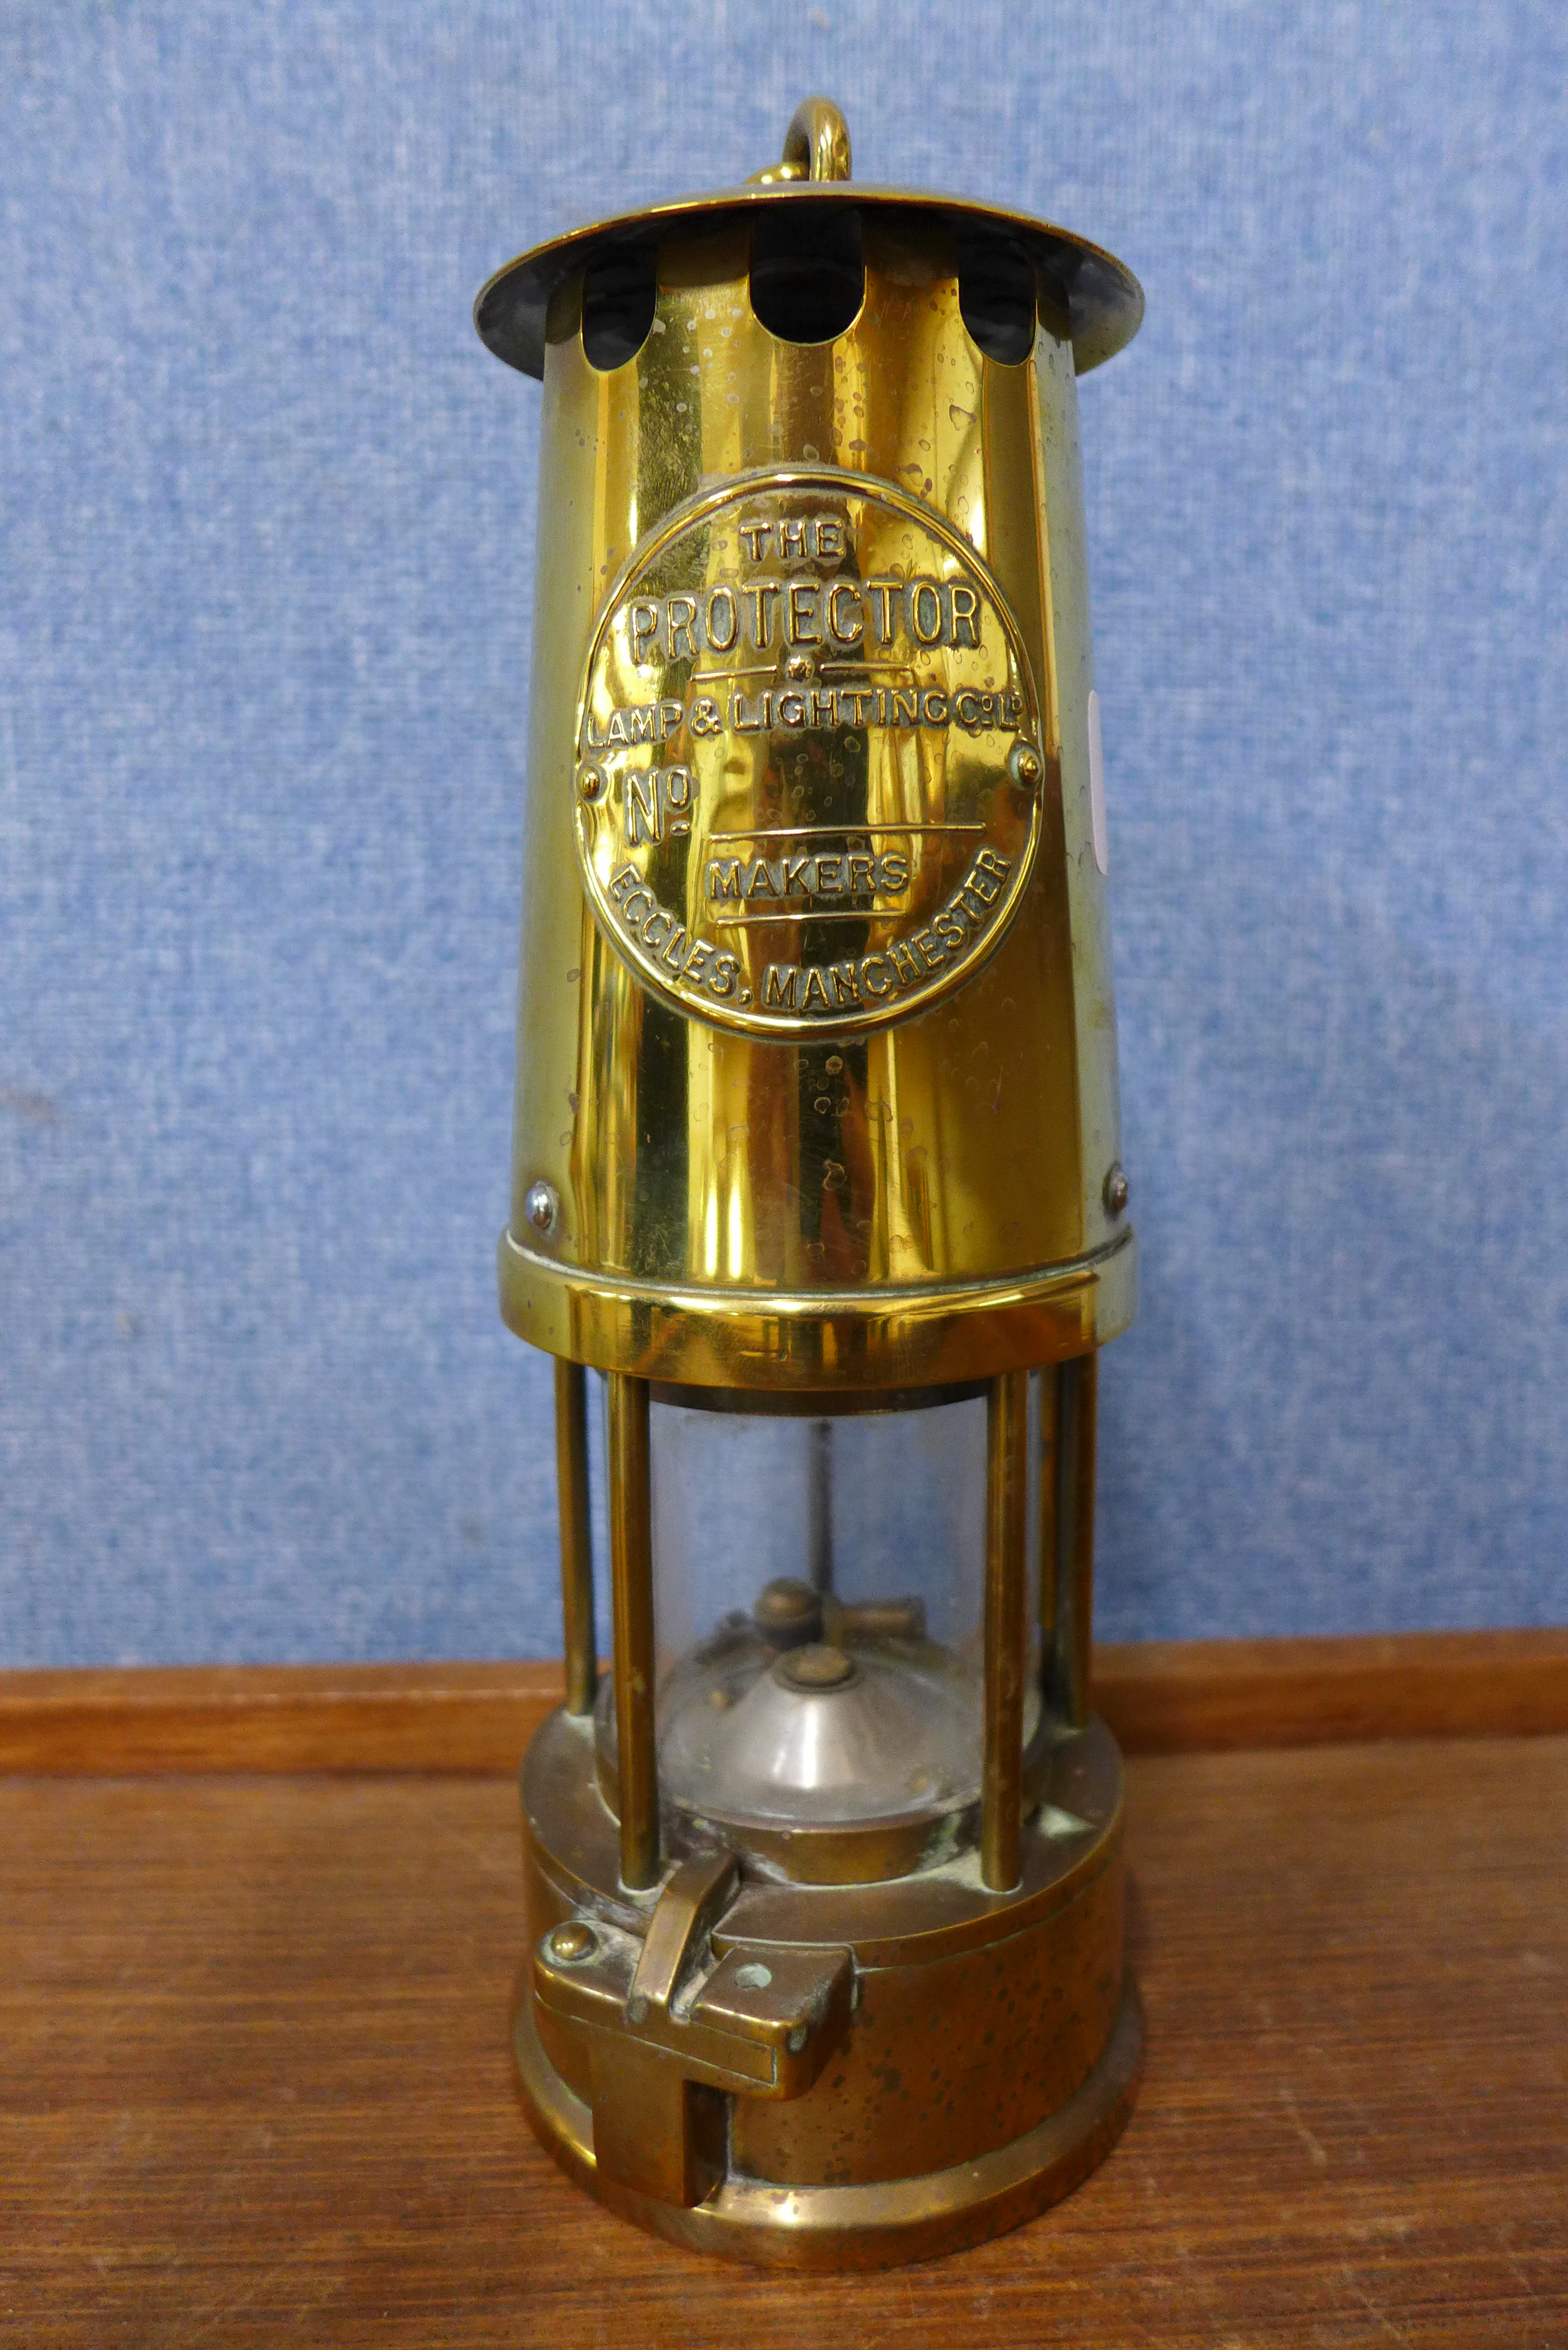 An Eccles Protector Lamp & Lighting Co.